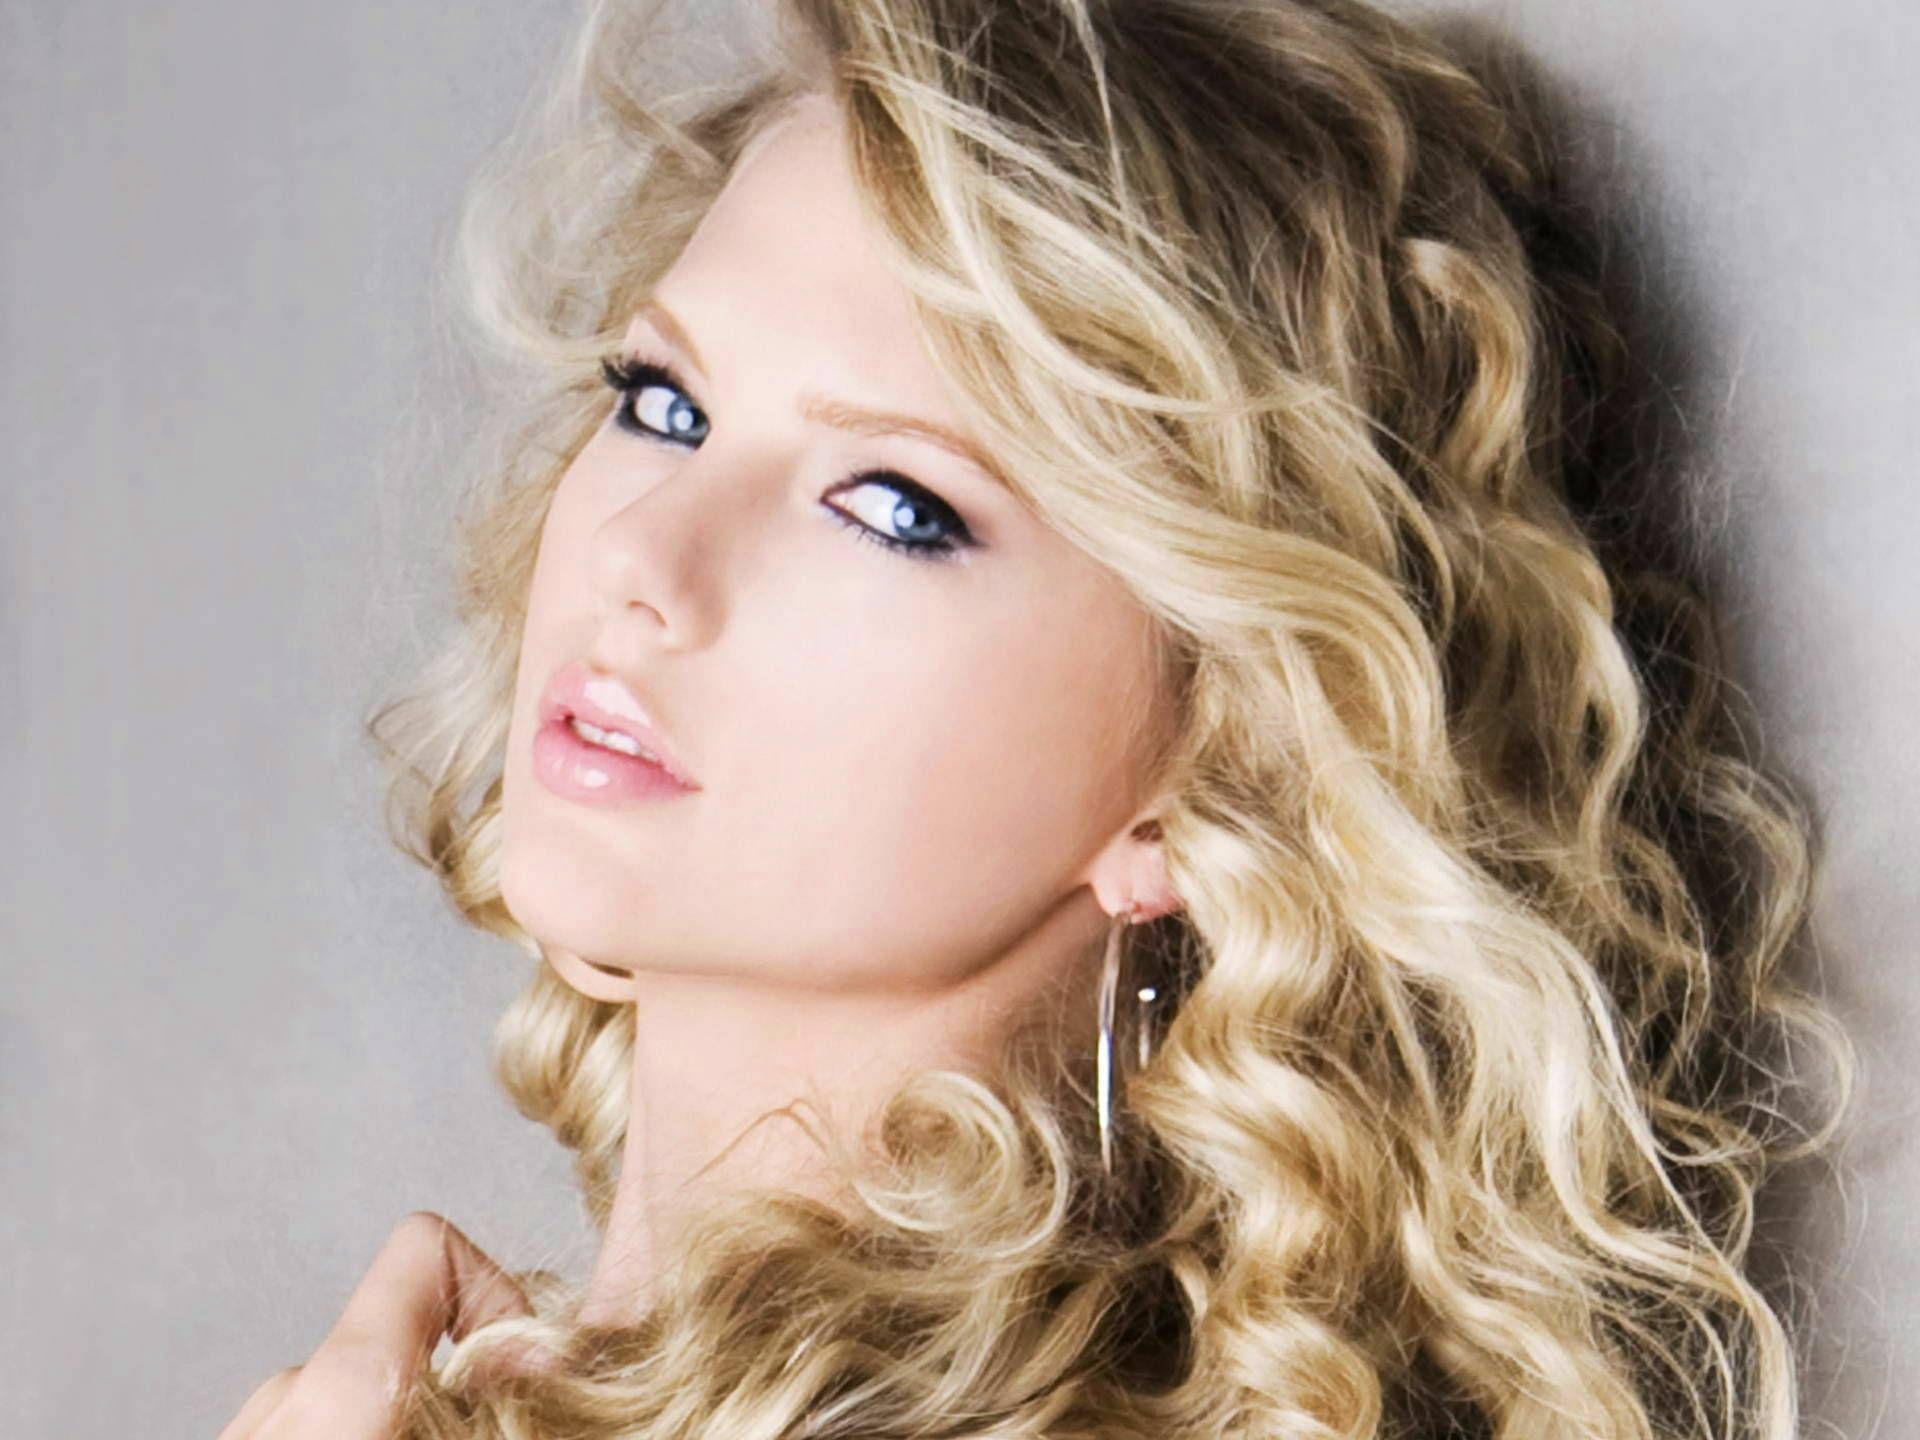 Taylor Swift Hd Wallpapers 22 | Free High Definition Unique Hd ...